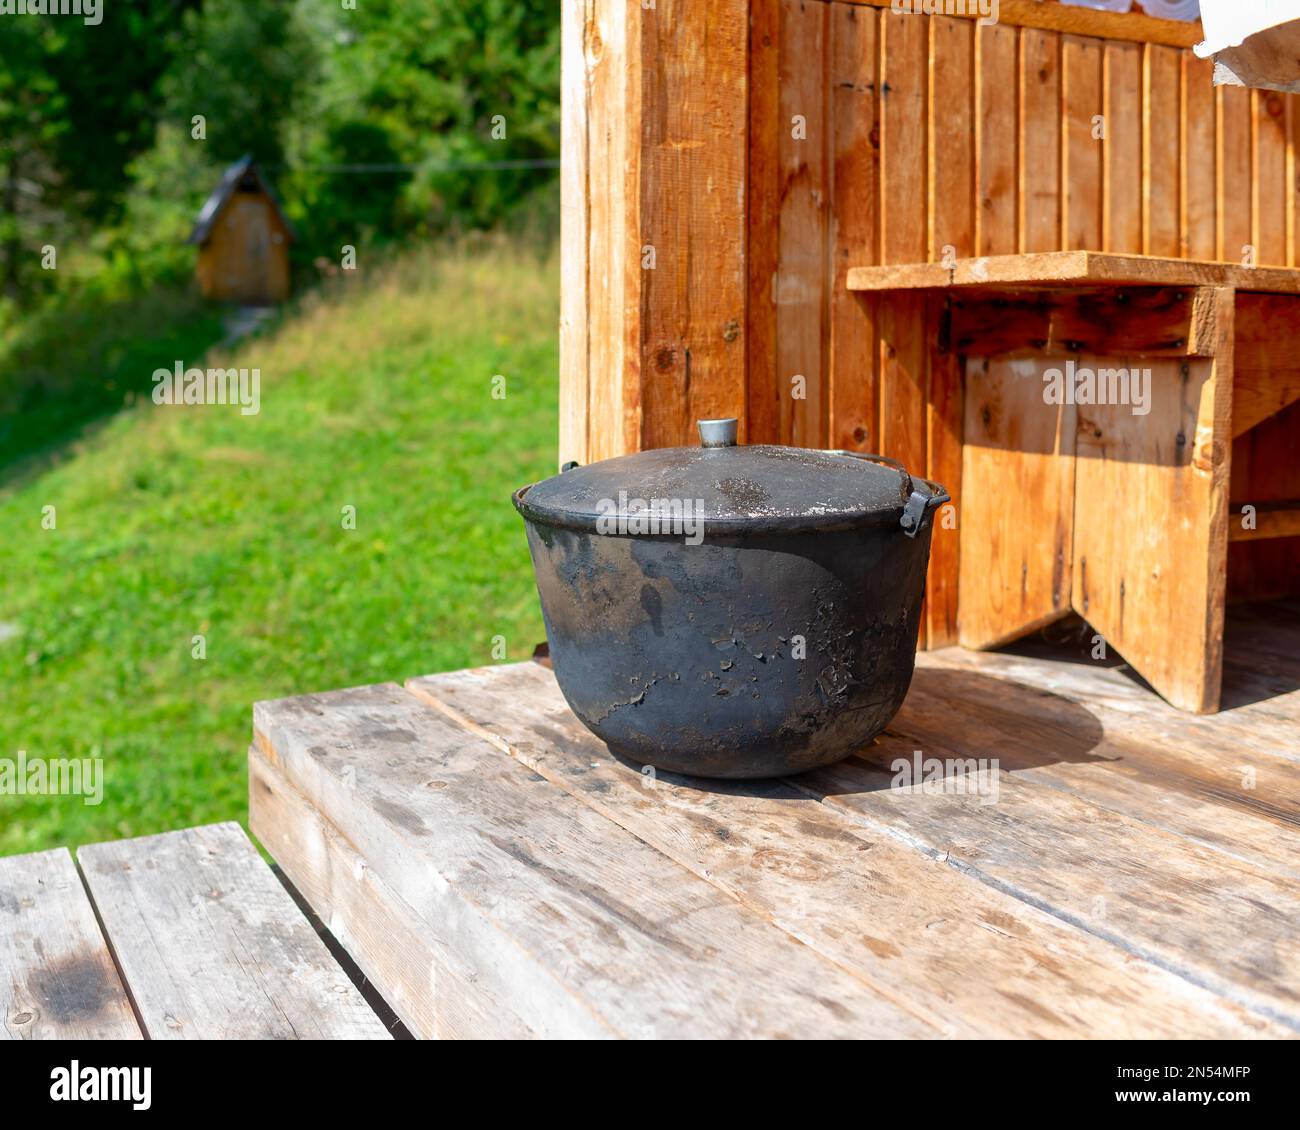 A large, black from soot, the cauldron, the pot stands on the edge of a wooden house a bright day amid toilet and herbs. Stock Photo